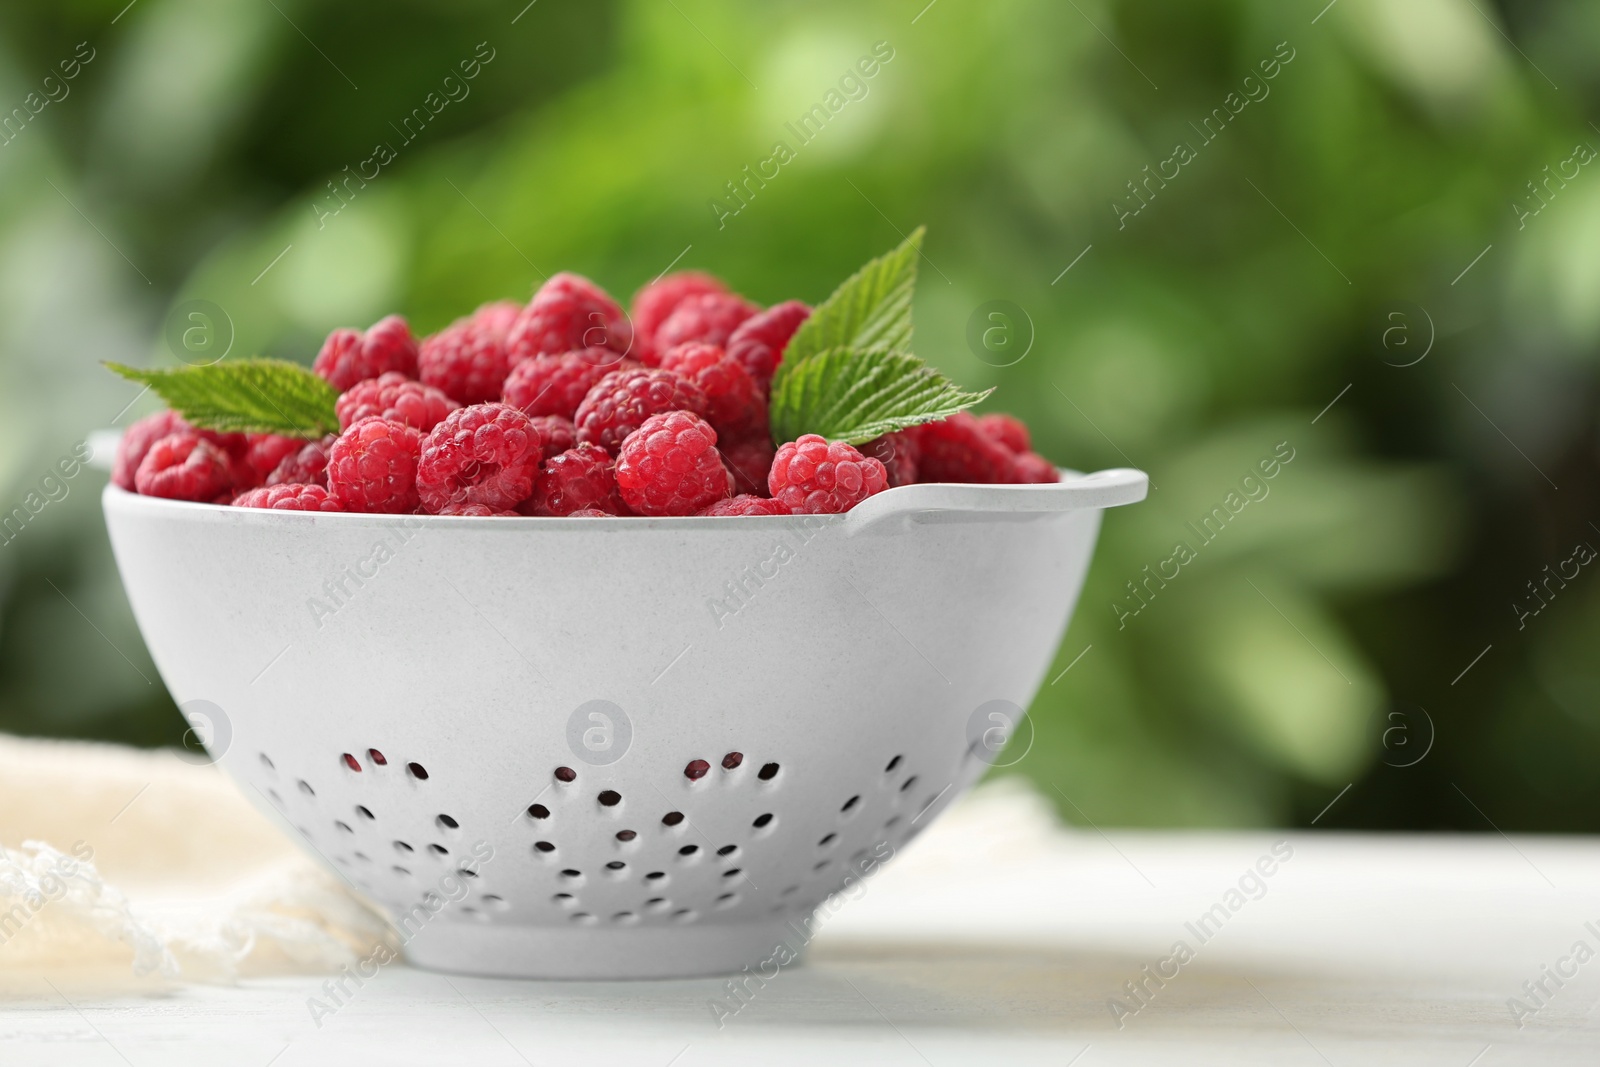 Photo of Colander with delicious ripe raspberries on white table against blurred background, space for text